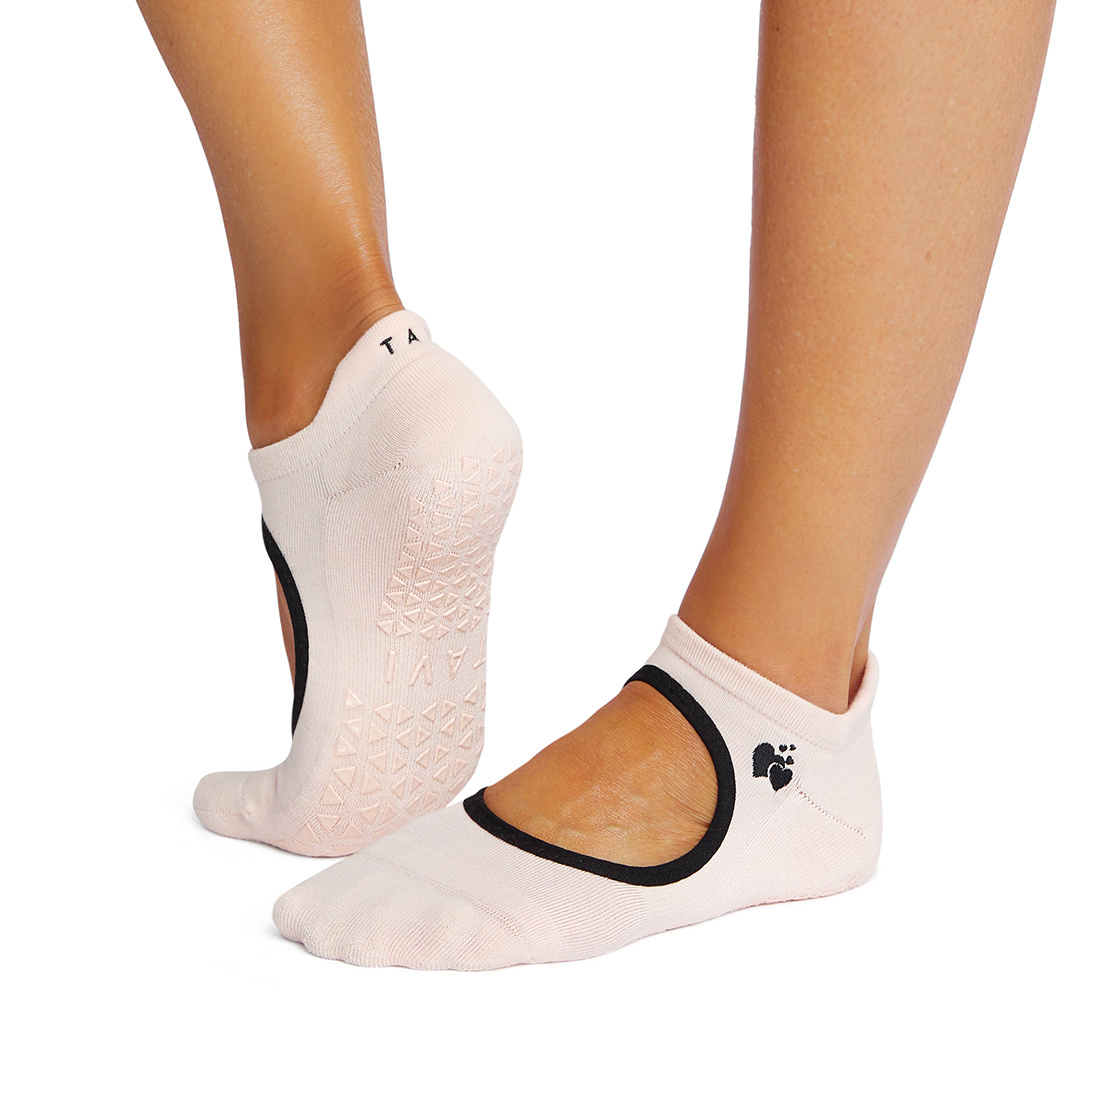 Yoga/Pilates Grip Socks-Assorted YS1296 - Canada's best deals on  Electronics, TVs, Unlocked Cell Phones, Macbooks, Laptops, Kitchen  Appliances, Toys, Bed and Bathroom products, Heaters, Humidifiers, Hair  appliances and so much more